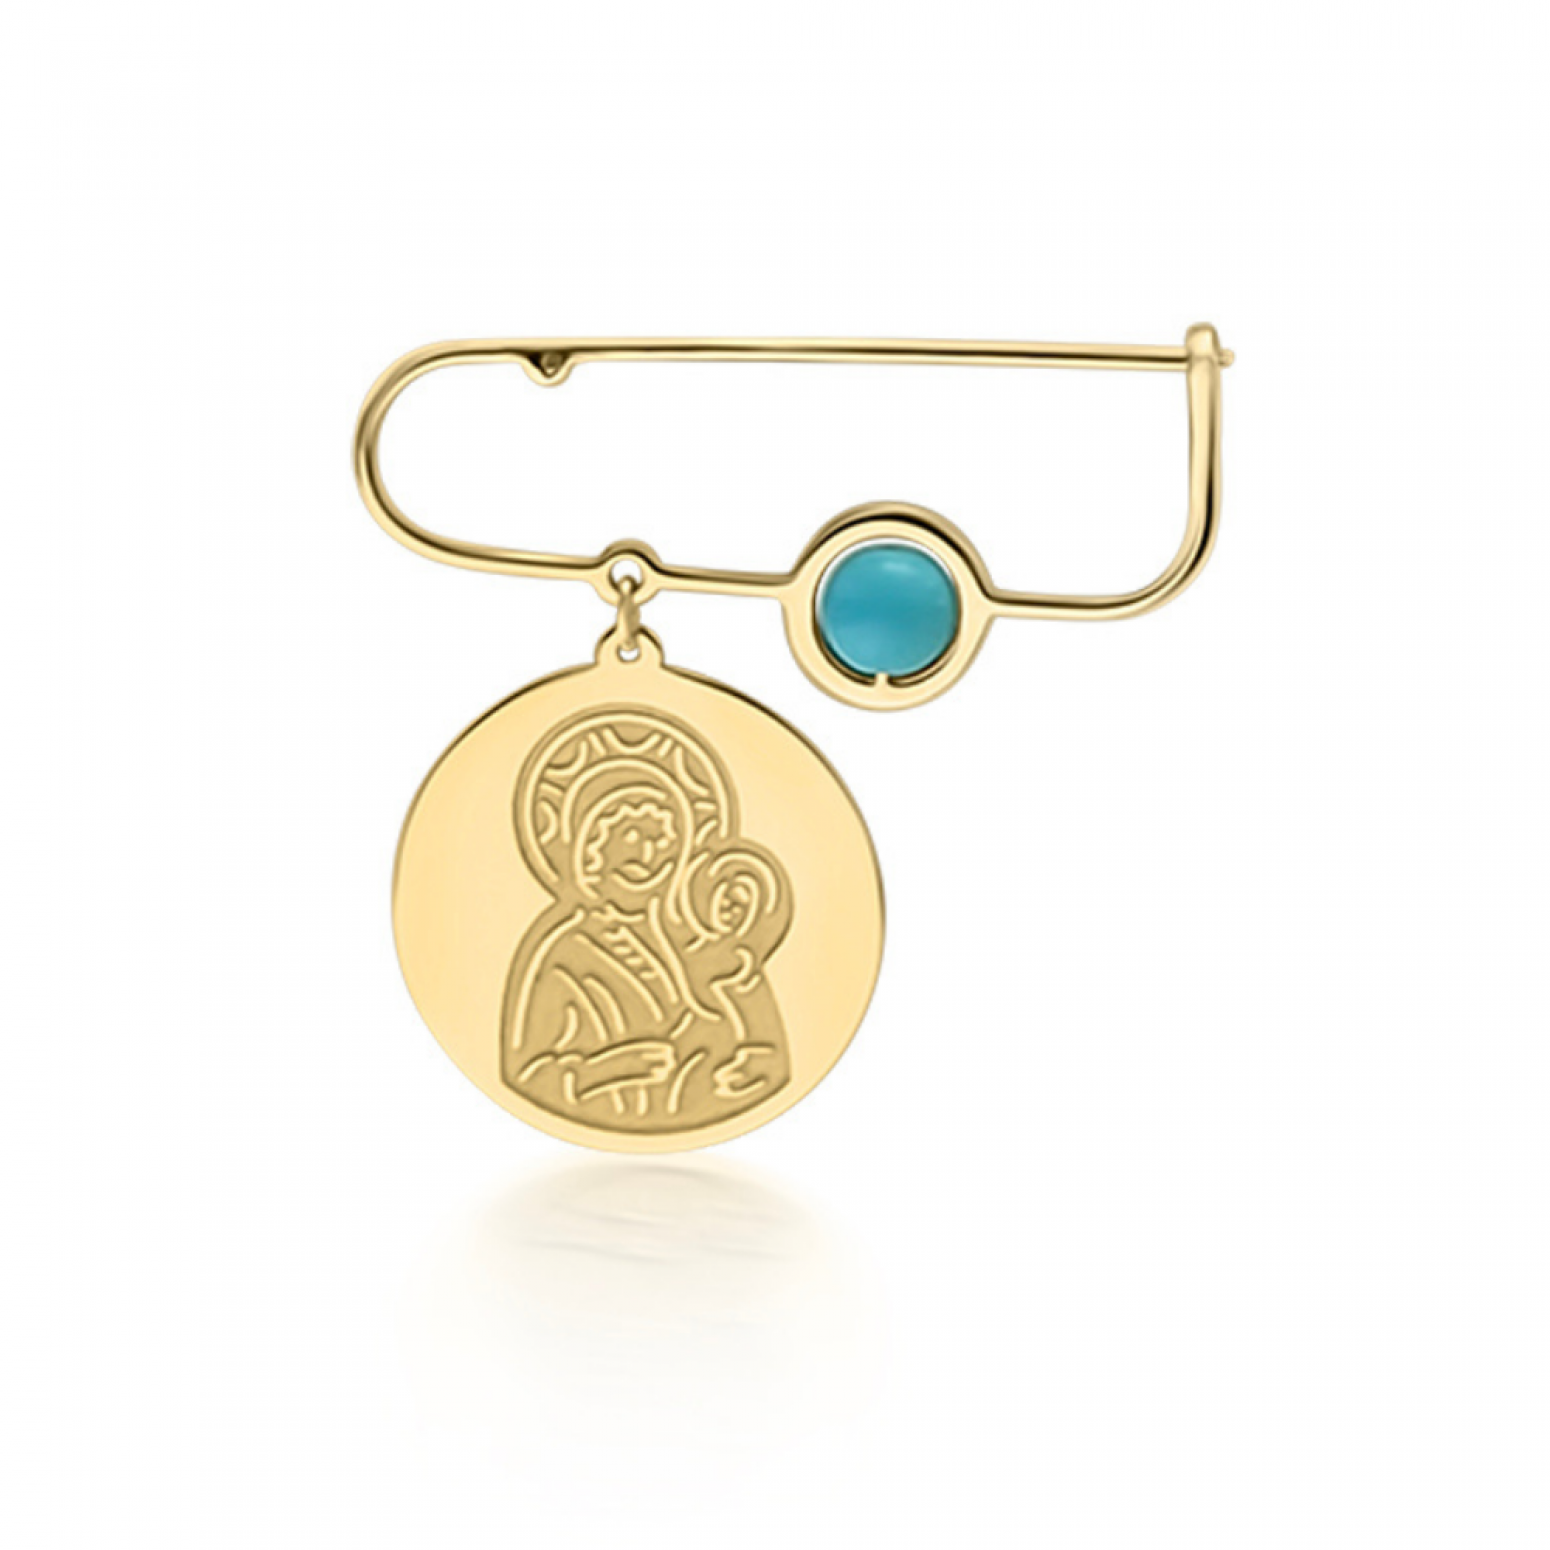 Babies pin K14 gold with Holy Mary and turquoise pf0168 BABIES Κοσμηματα - chrilia.gr